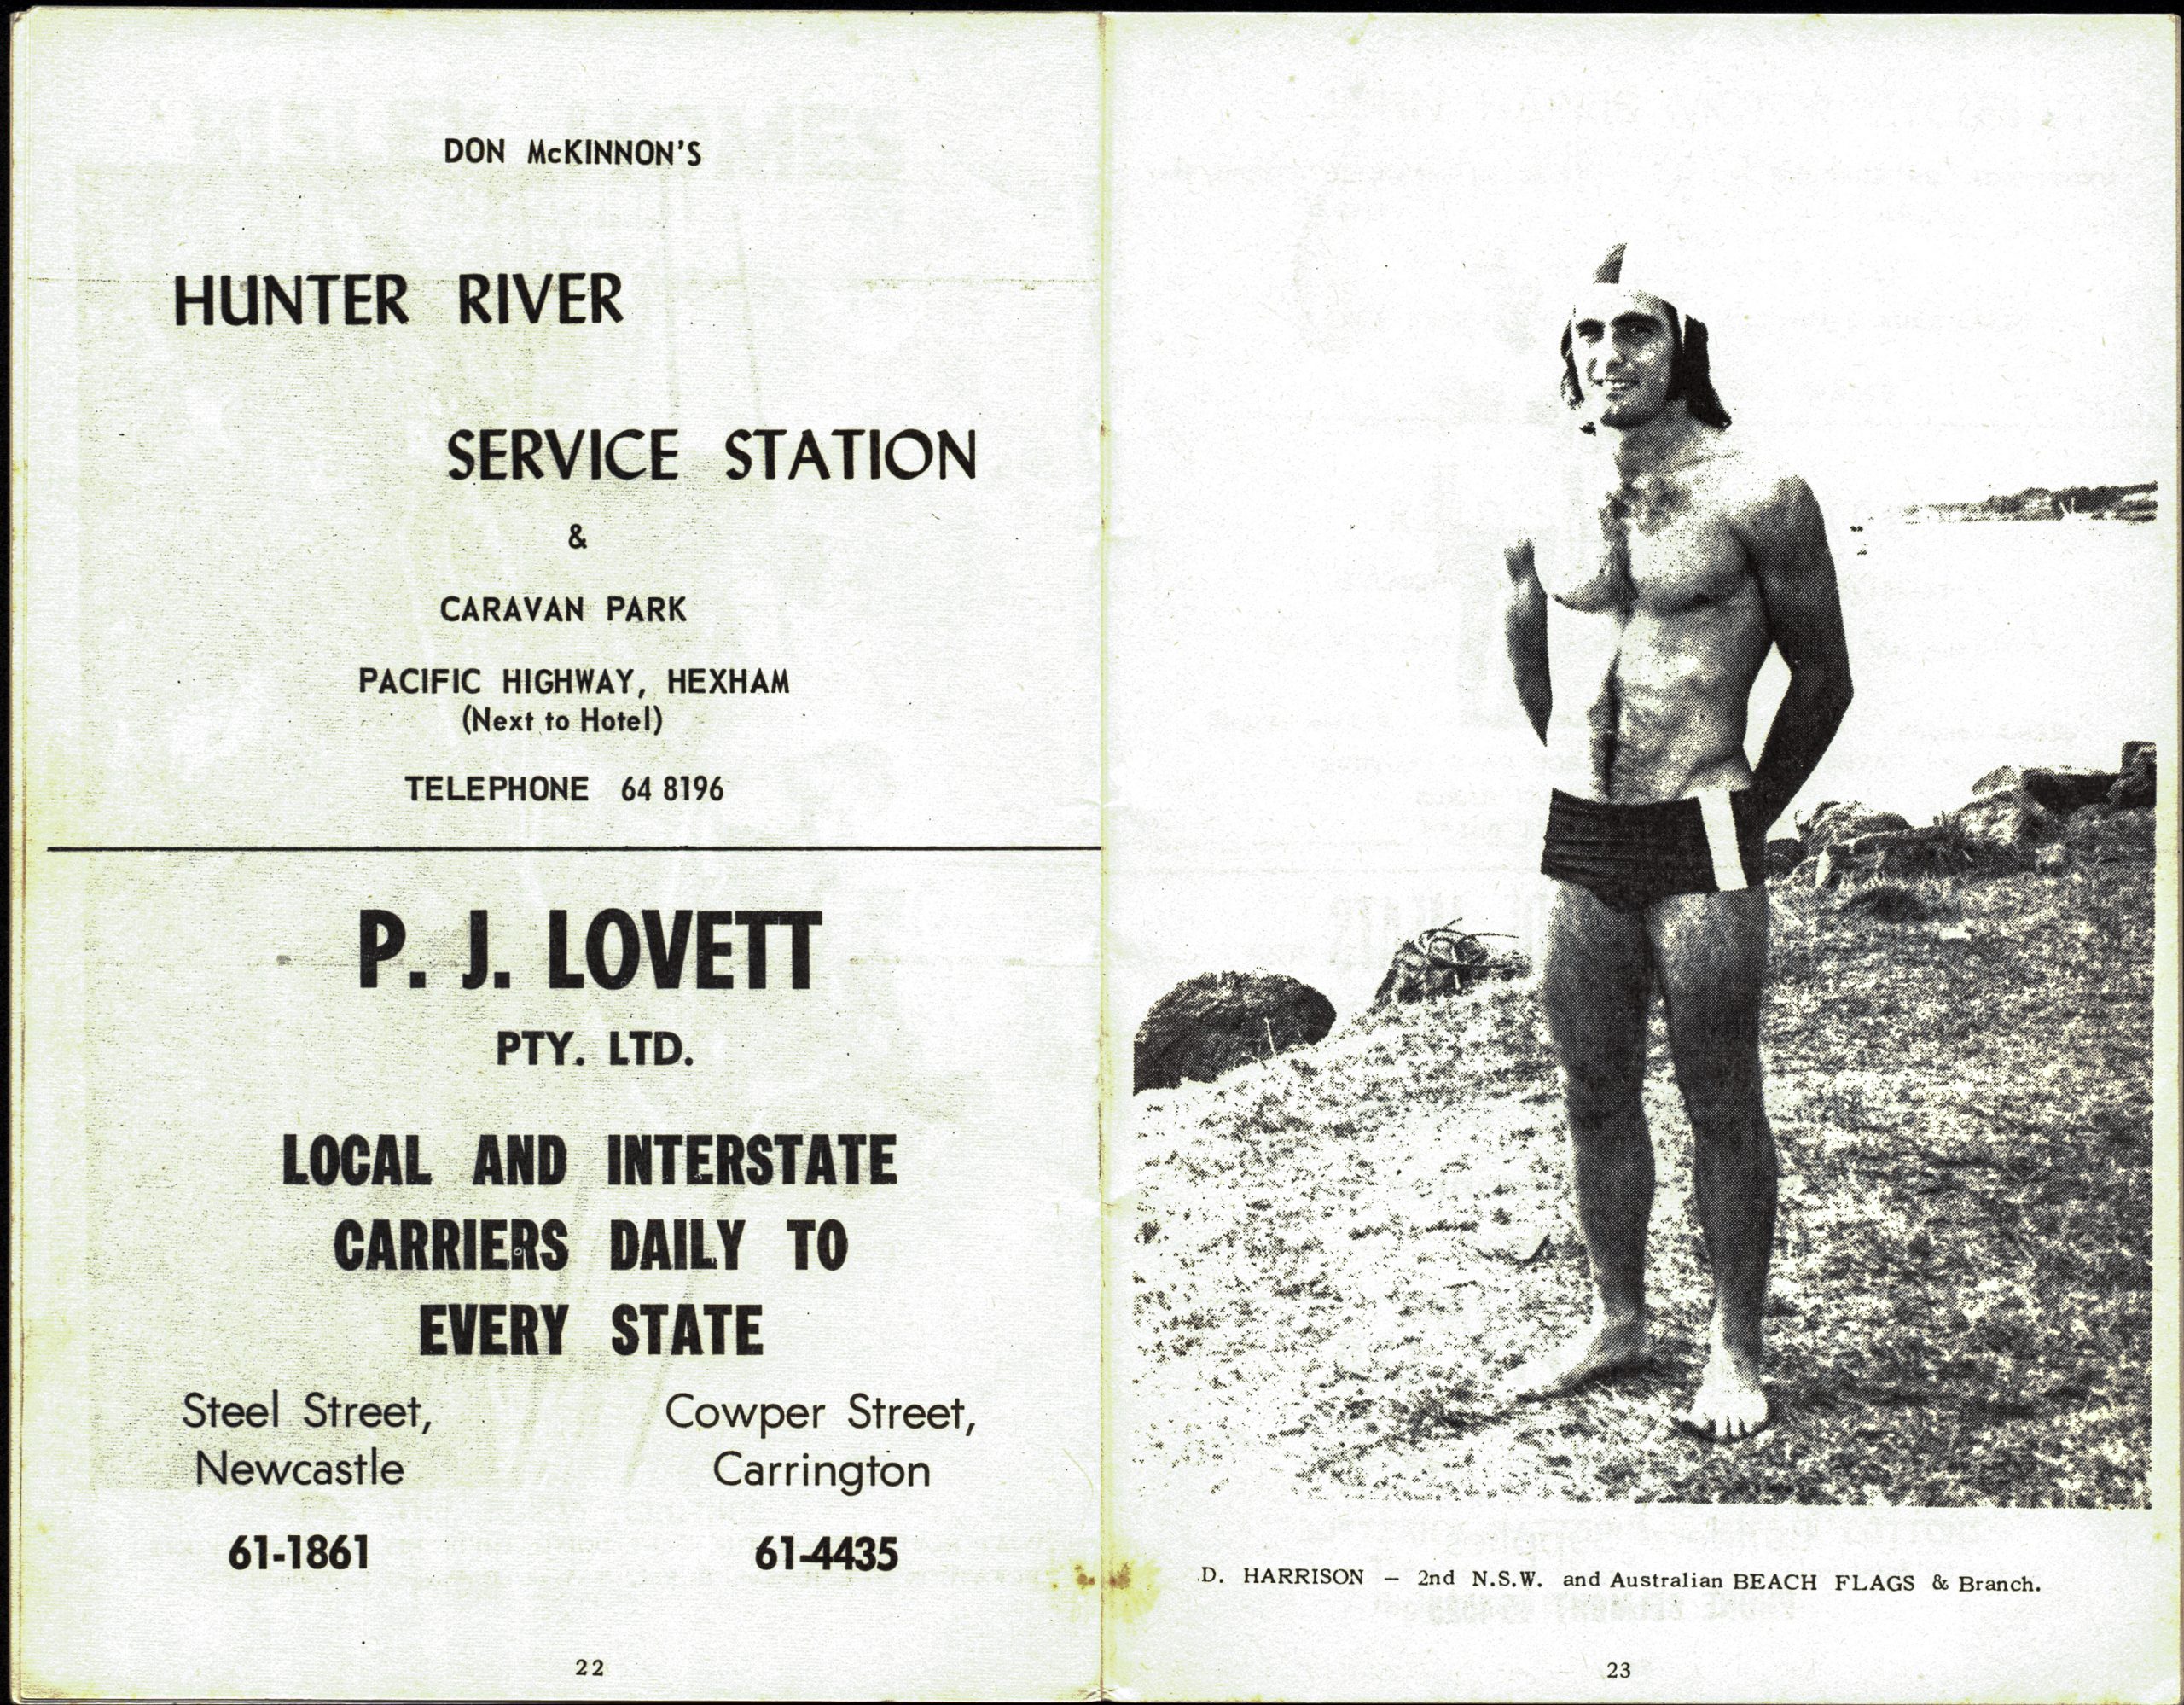 Programme pages with local advertisements followed by a black and white photograph of a life saver in swimmers named D. Harrison.